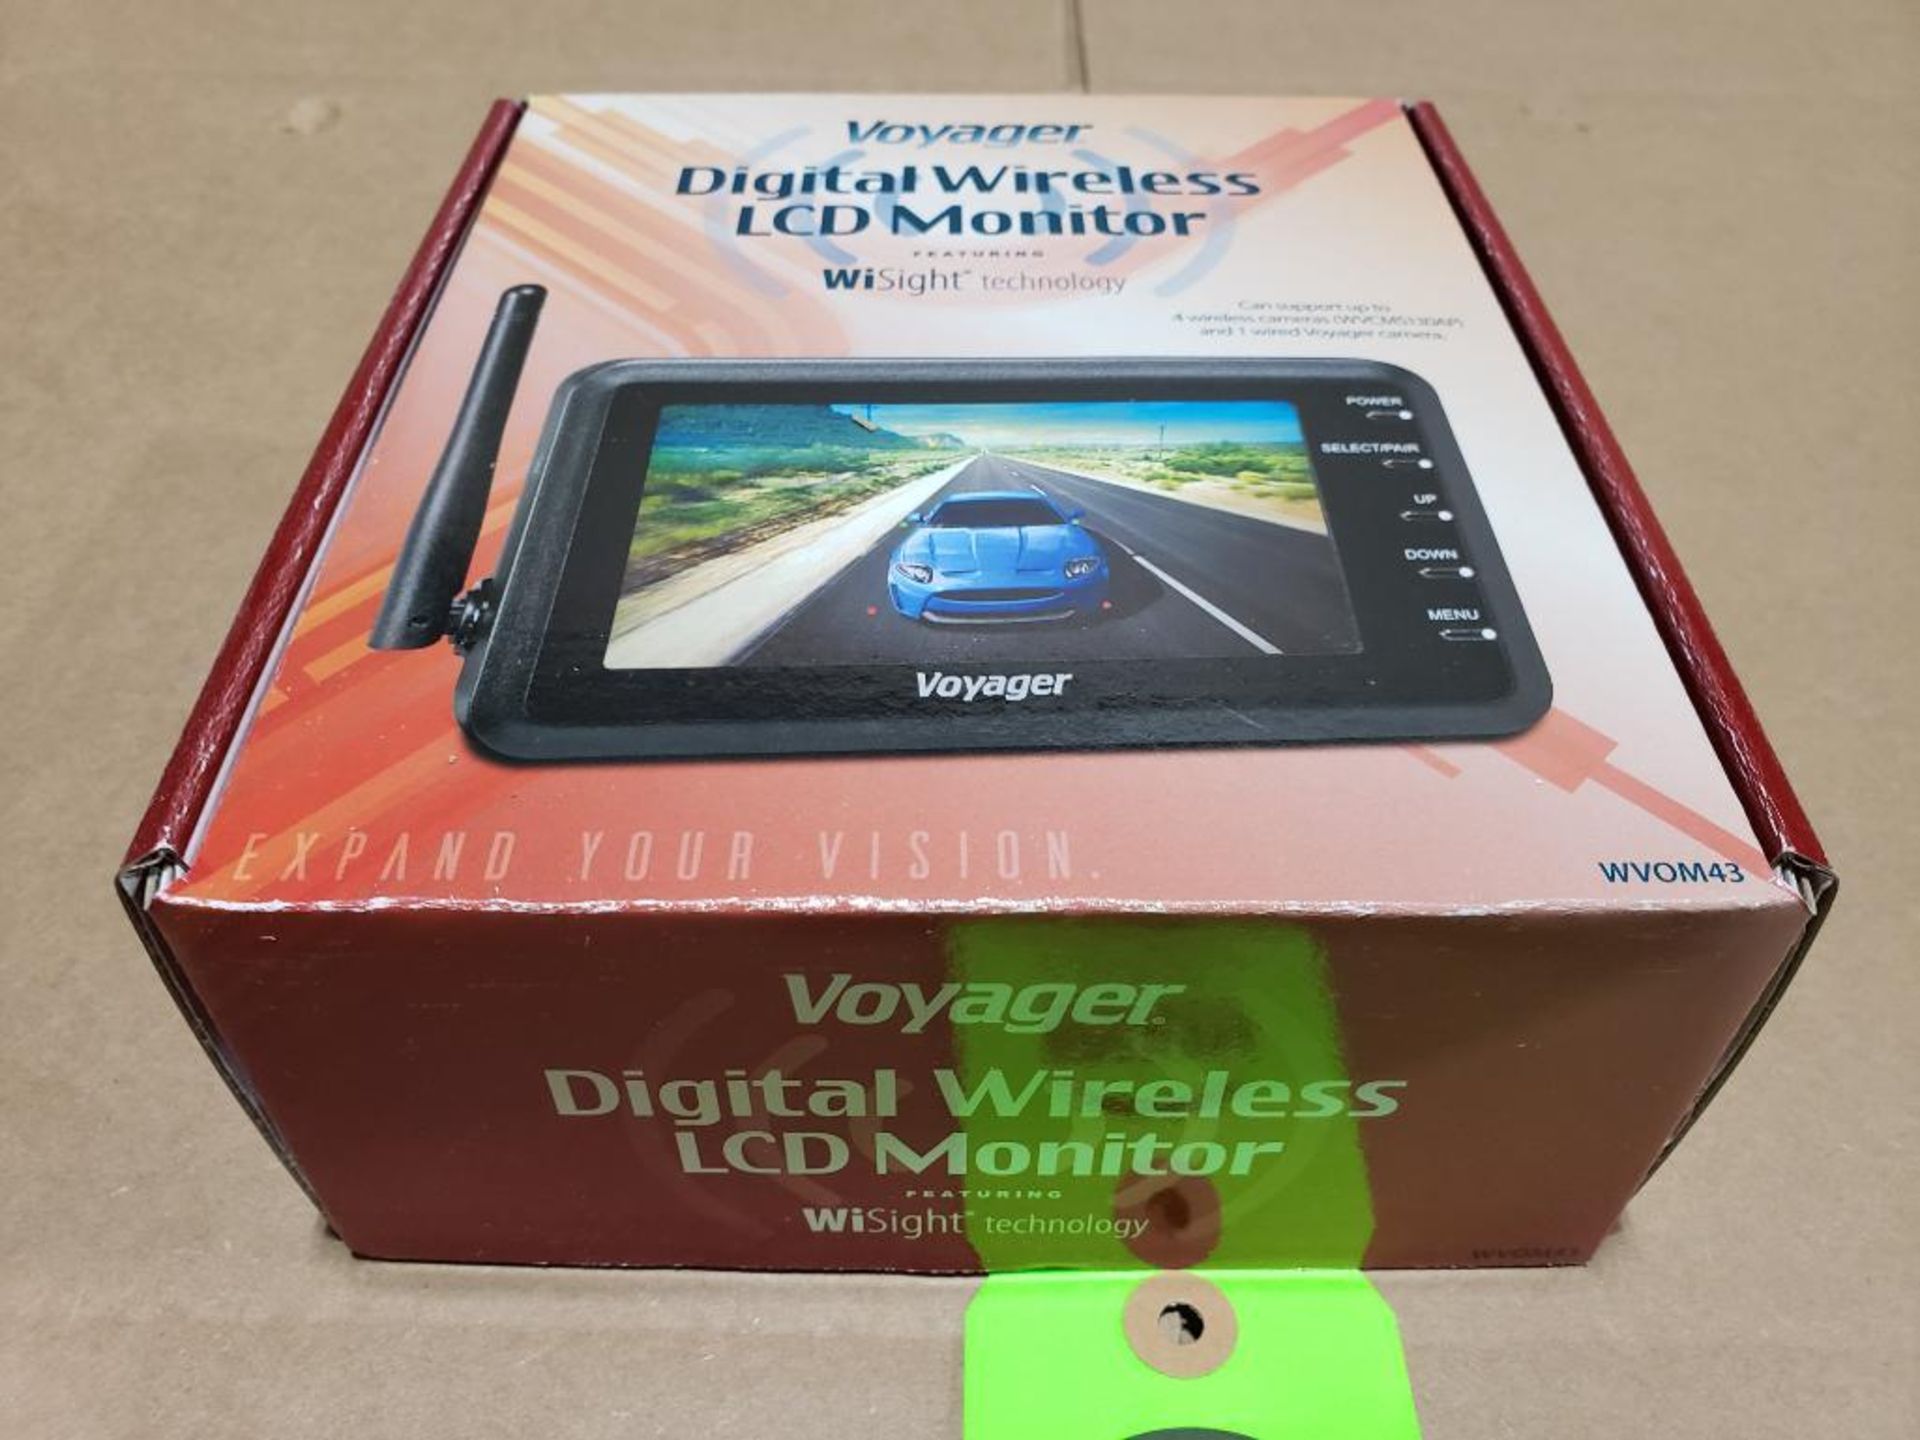 Voyager Digital Wireless LCD Monitor. Features WiSight techology. Model WVOM43. - Image 2 of 8